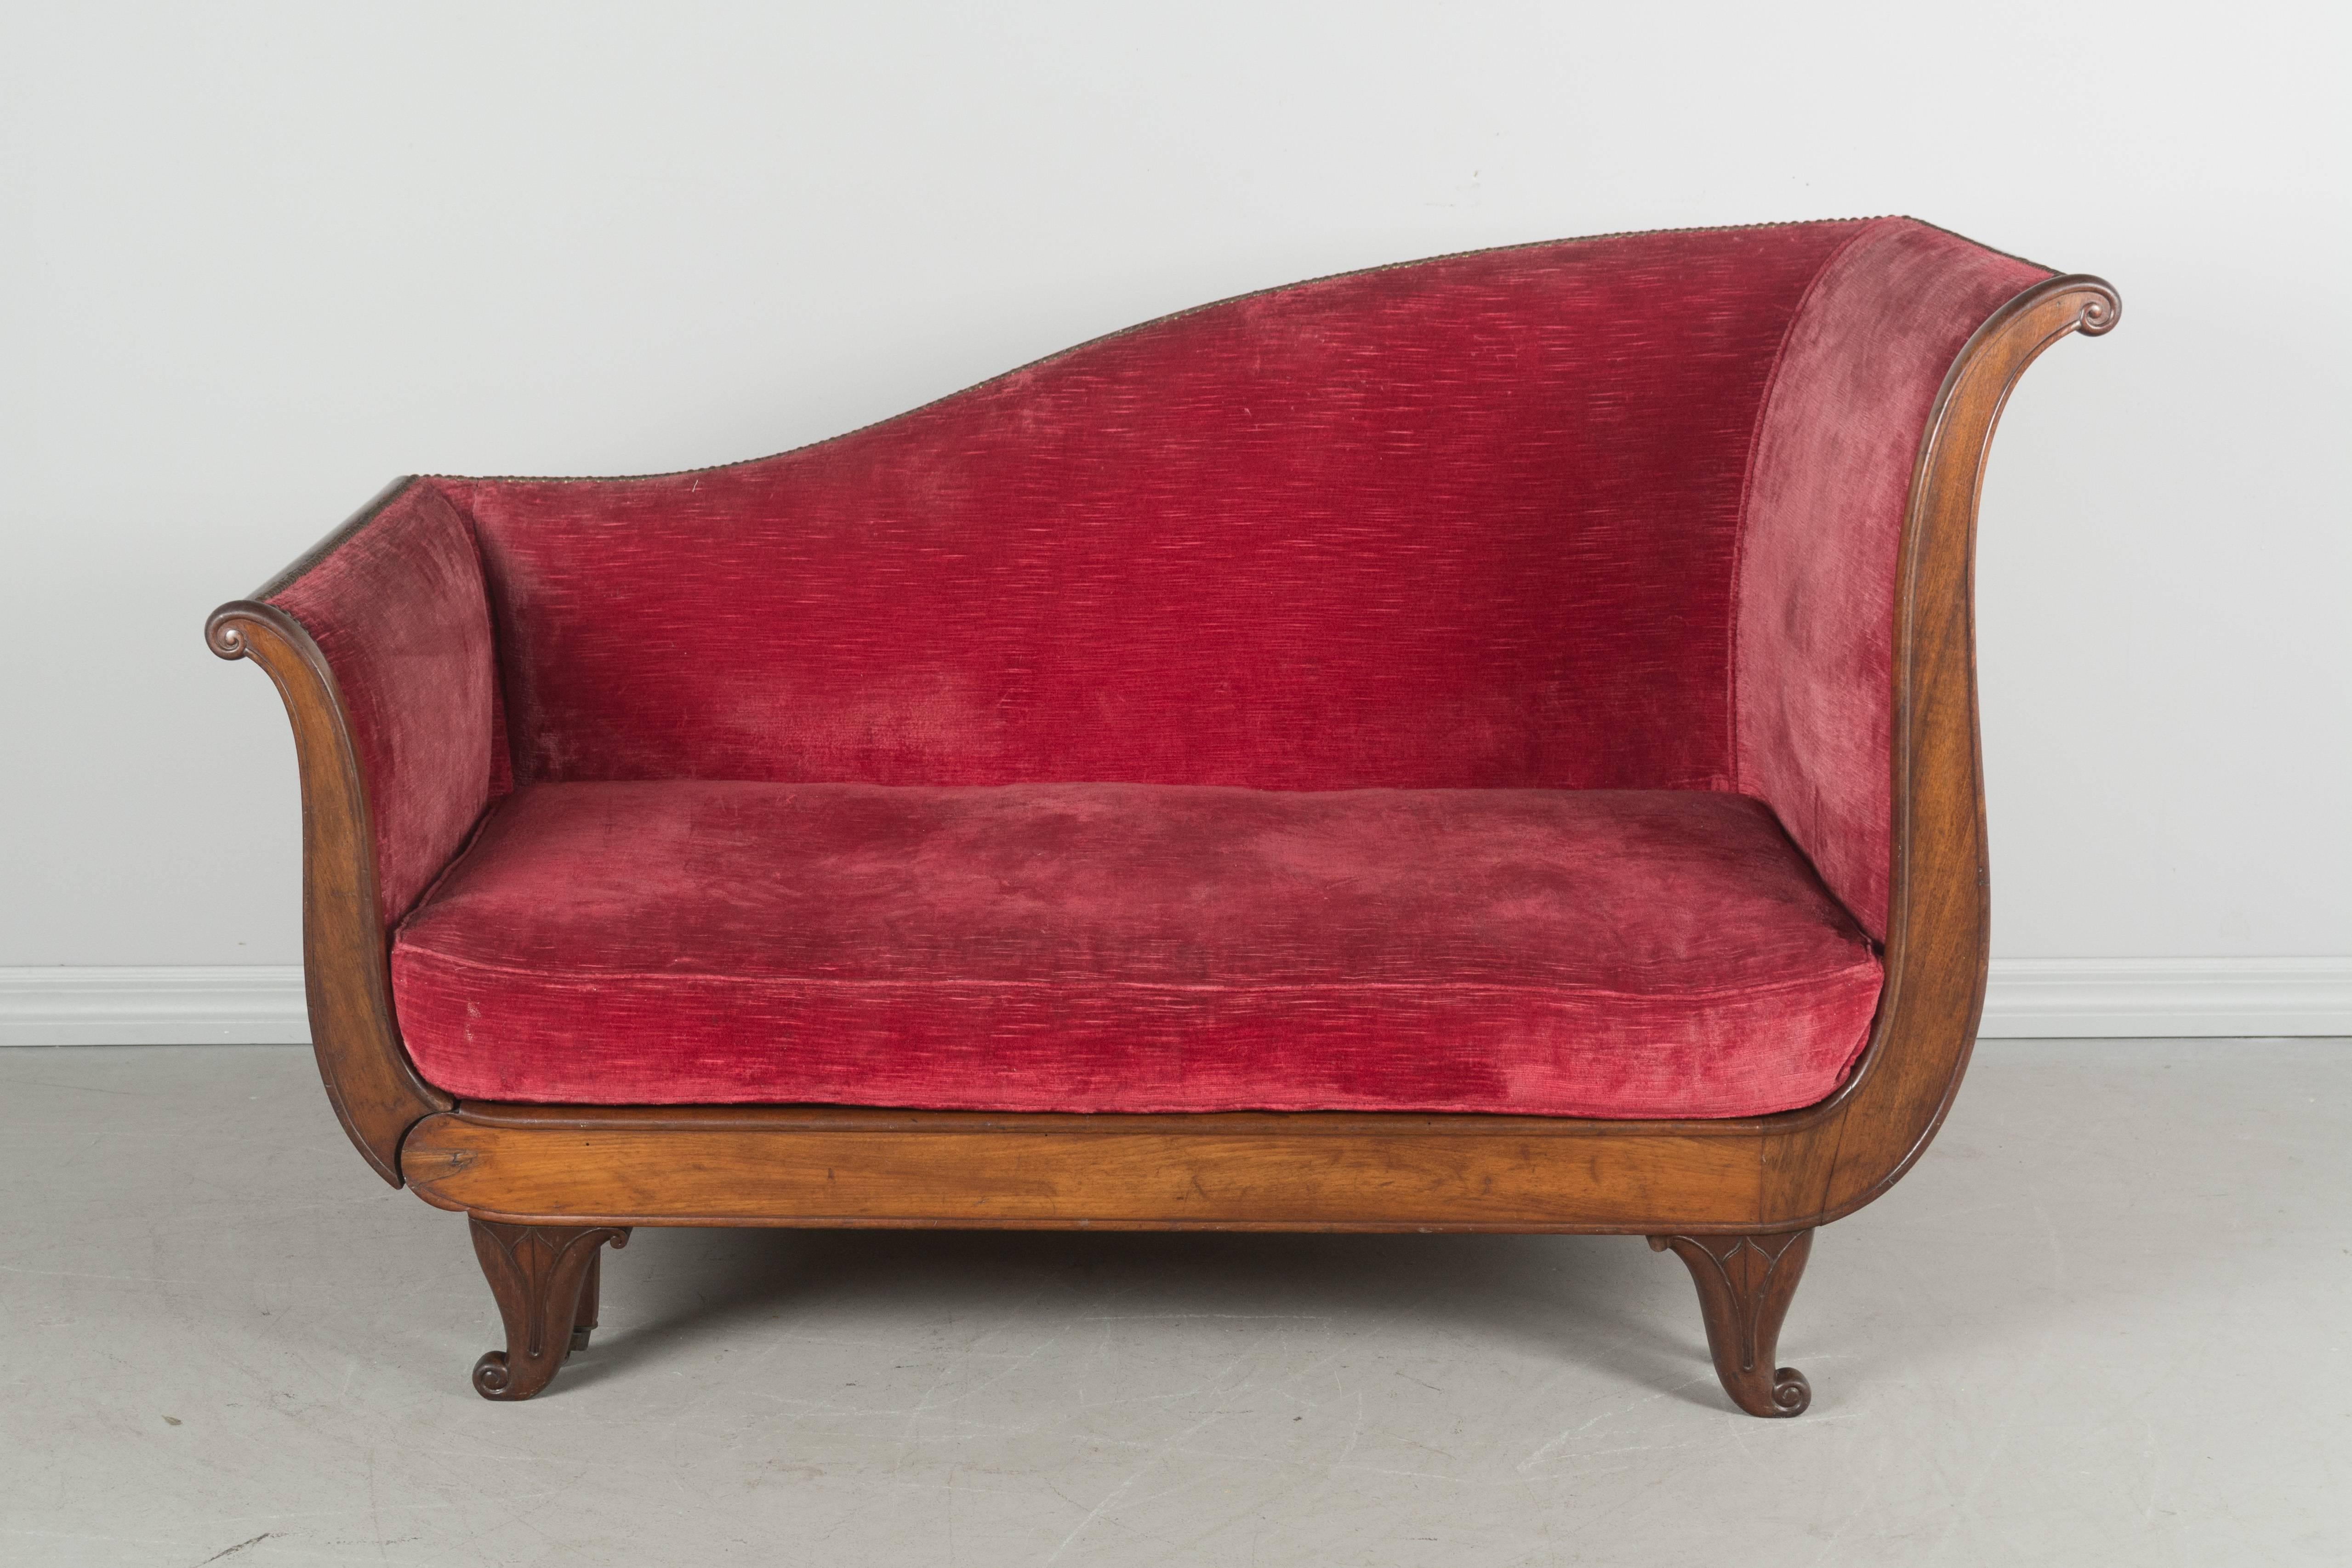 19th century French Empire style méridienne or settee with mahogany frame. One side hinges down to create a daybed, or chaise for reclining. Original castors glide easily. Old velvet upholstery is serviceable. 
Overall: 58" W x 27.5" D x